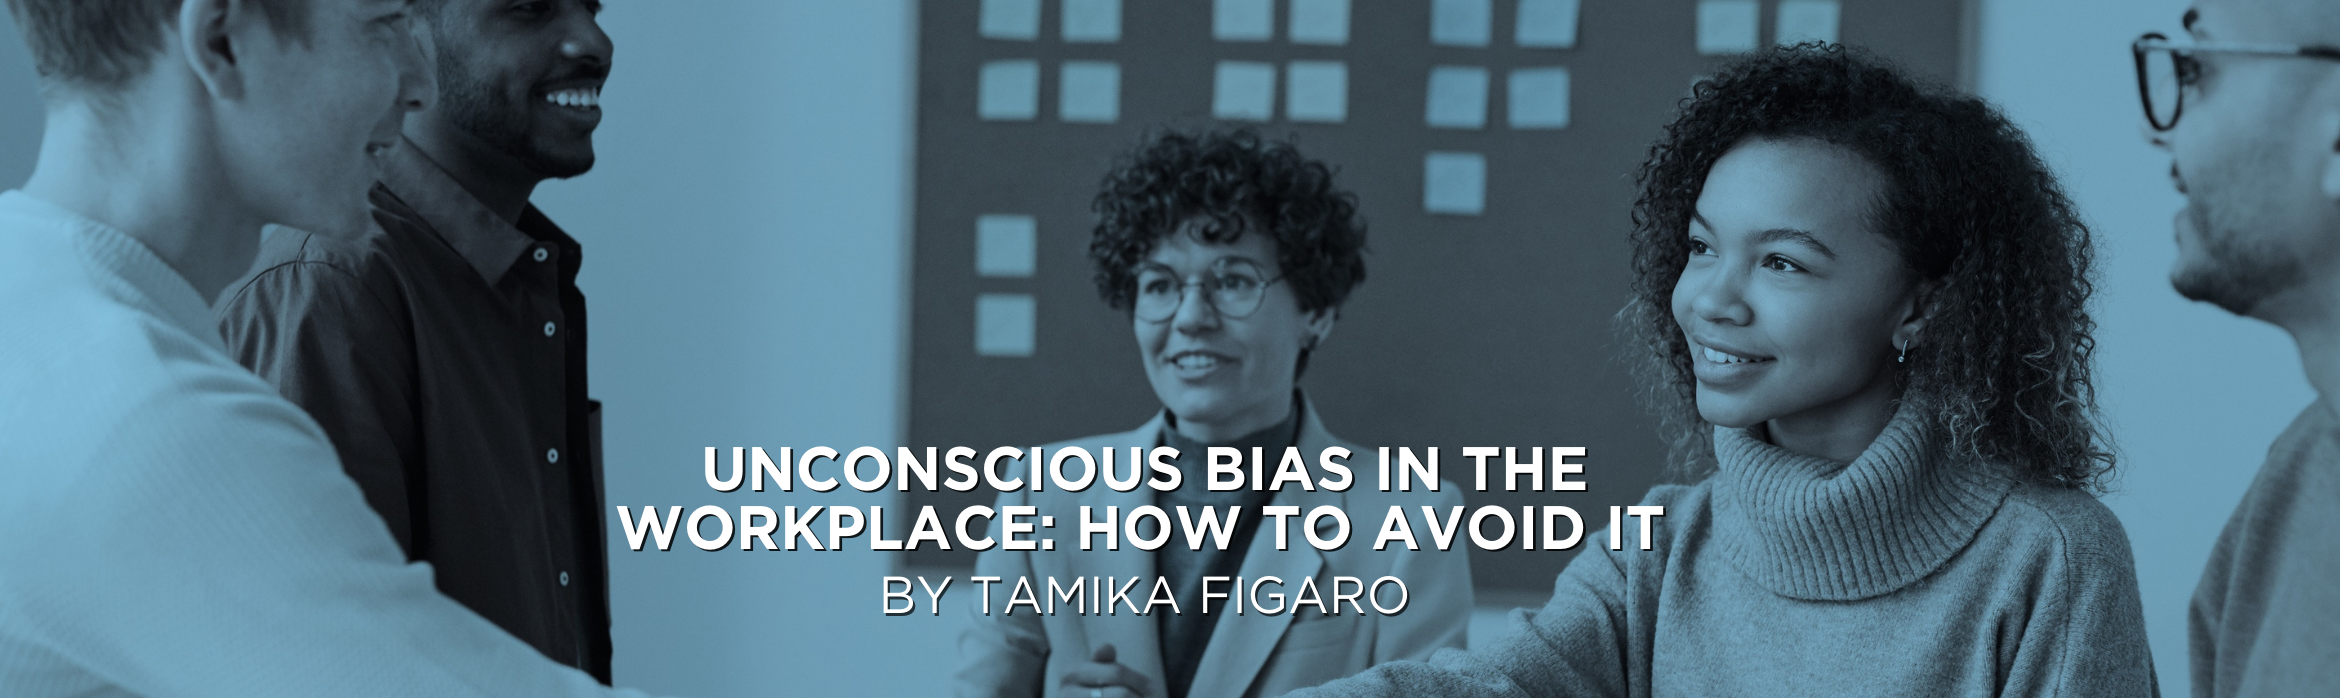 Unconscious Bias in the Workplace: How to Avoid It 